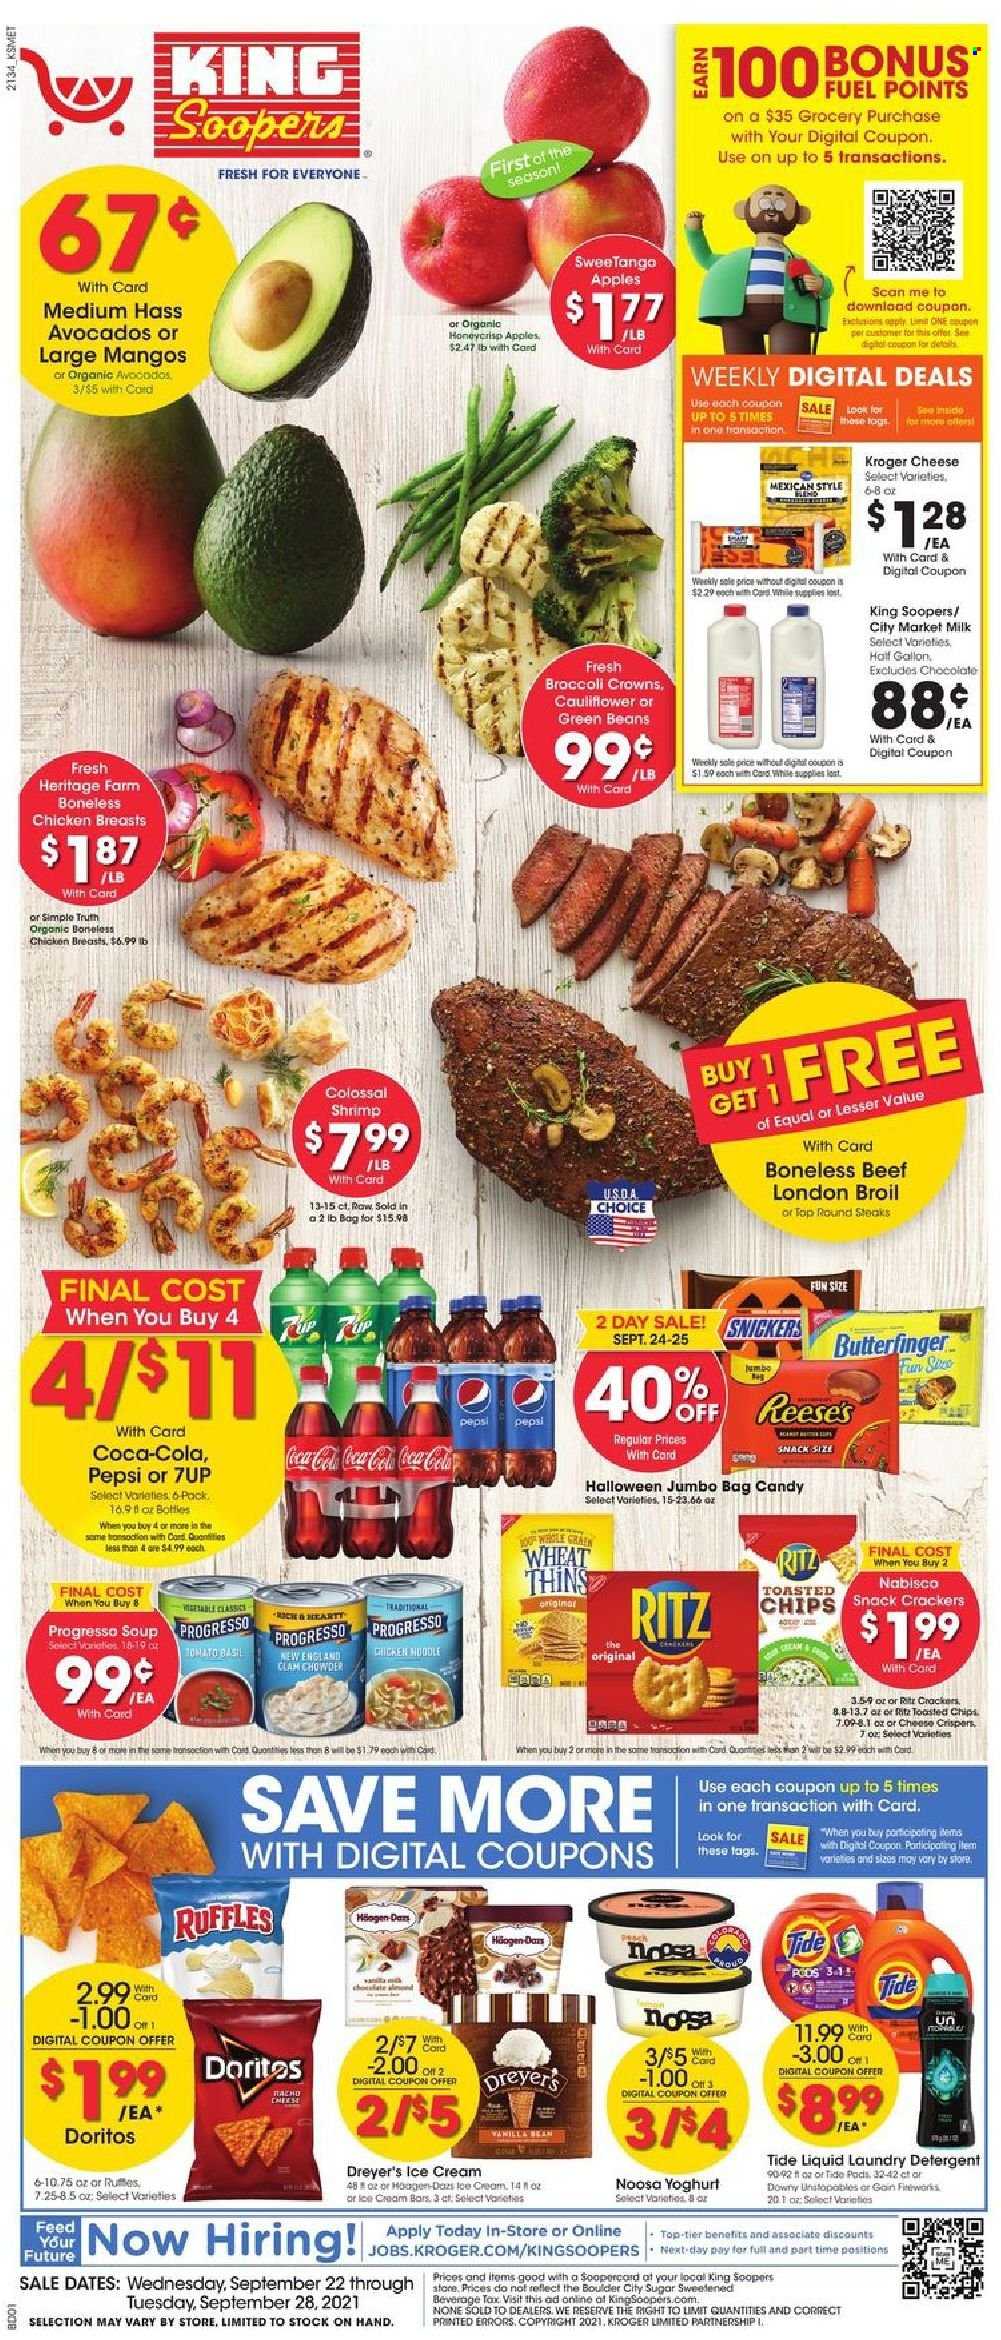 thumbnail - King Soopers Flyer - 09/22/2021 - 09/28/2021 - Sales products - beans, green beans, avocado, shrimps, noodles, Progresso, yoghurt, milk, Reese's, chocolate, snack, Snickers, crackers, RITZ, Doritos, chips, Thins, Ruffles, sugar, clam chowder, esponja, Coca-Cola, Pepsi, 7UP, chicken breasts, steak, detergent, Tide, laundry detergent. Page 1.